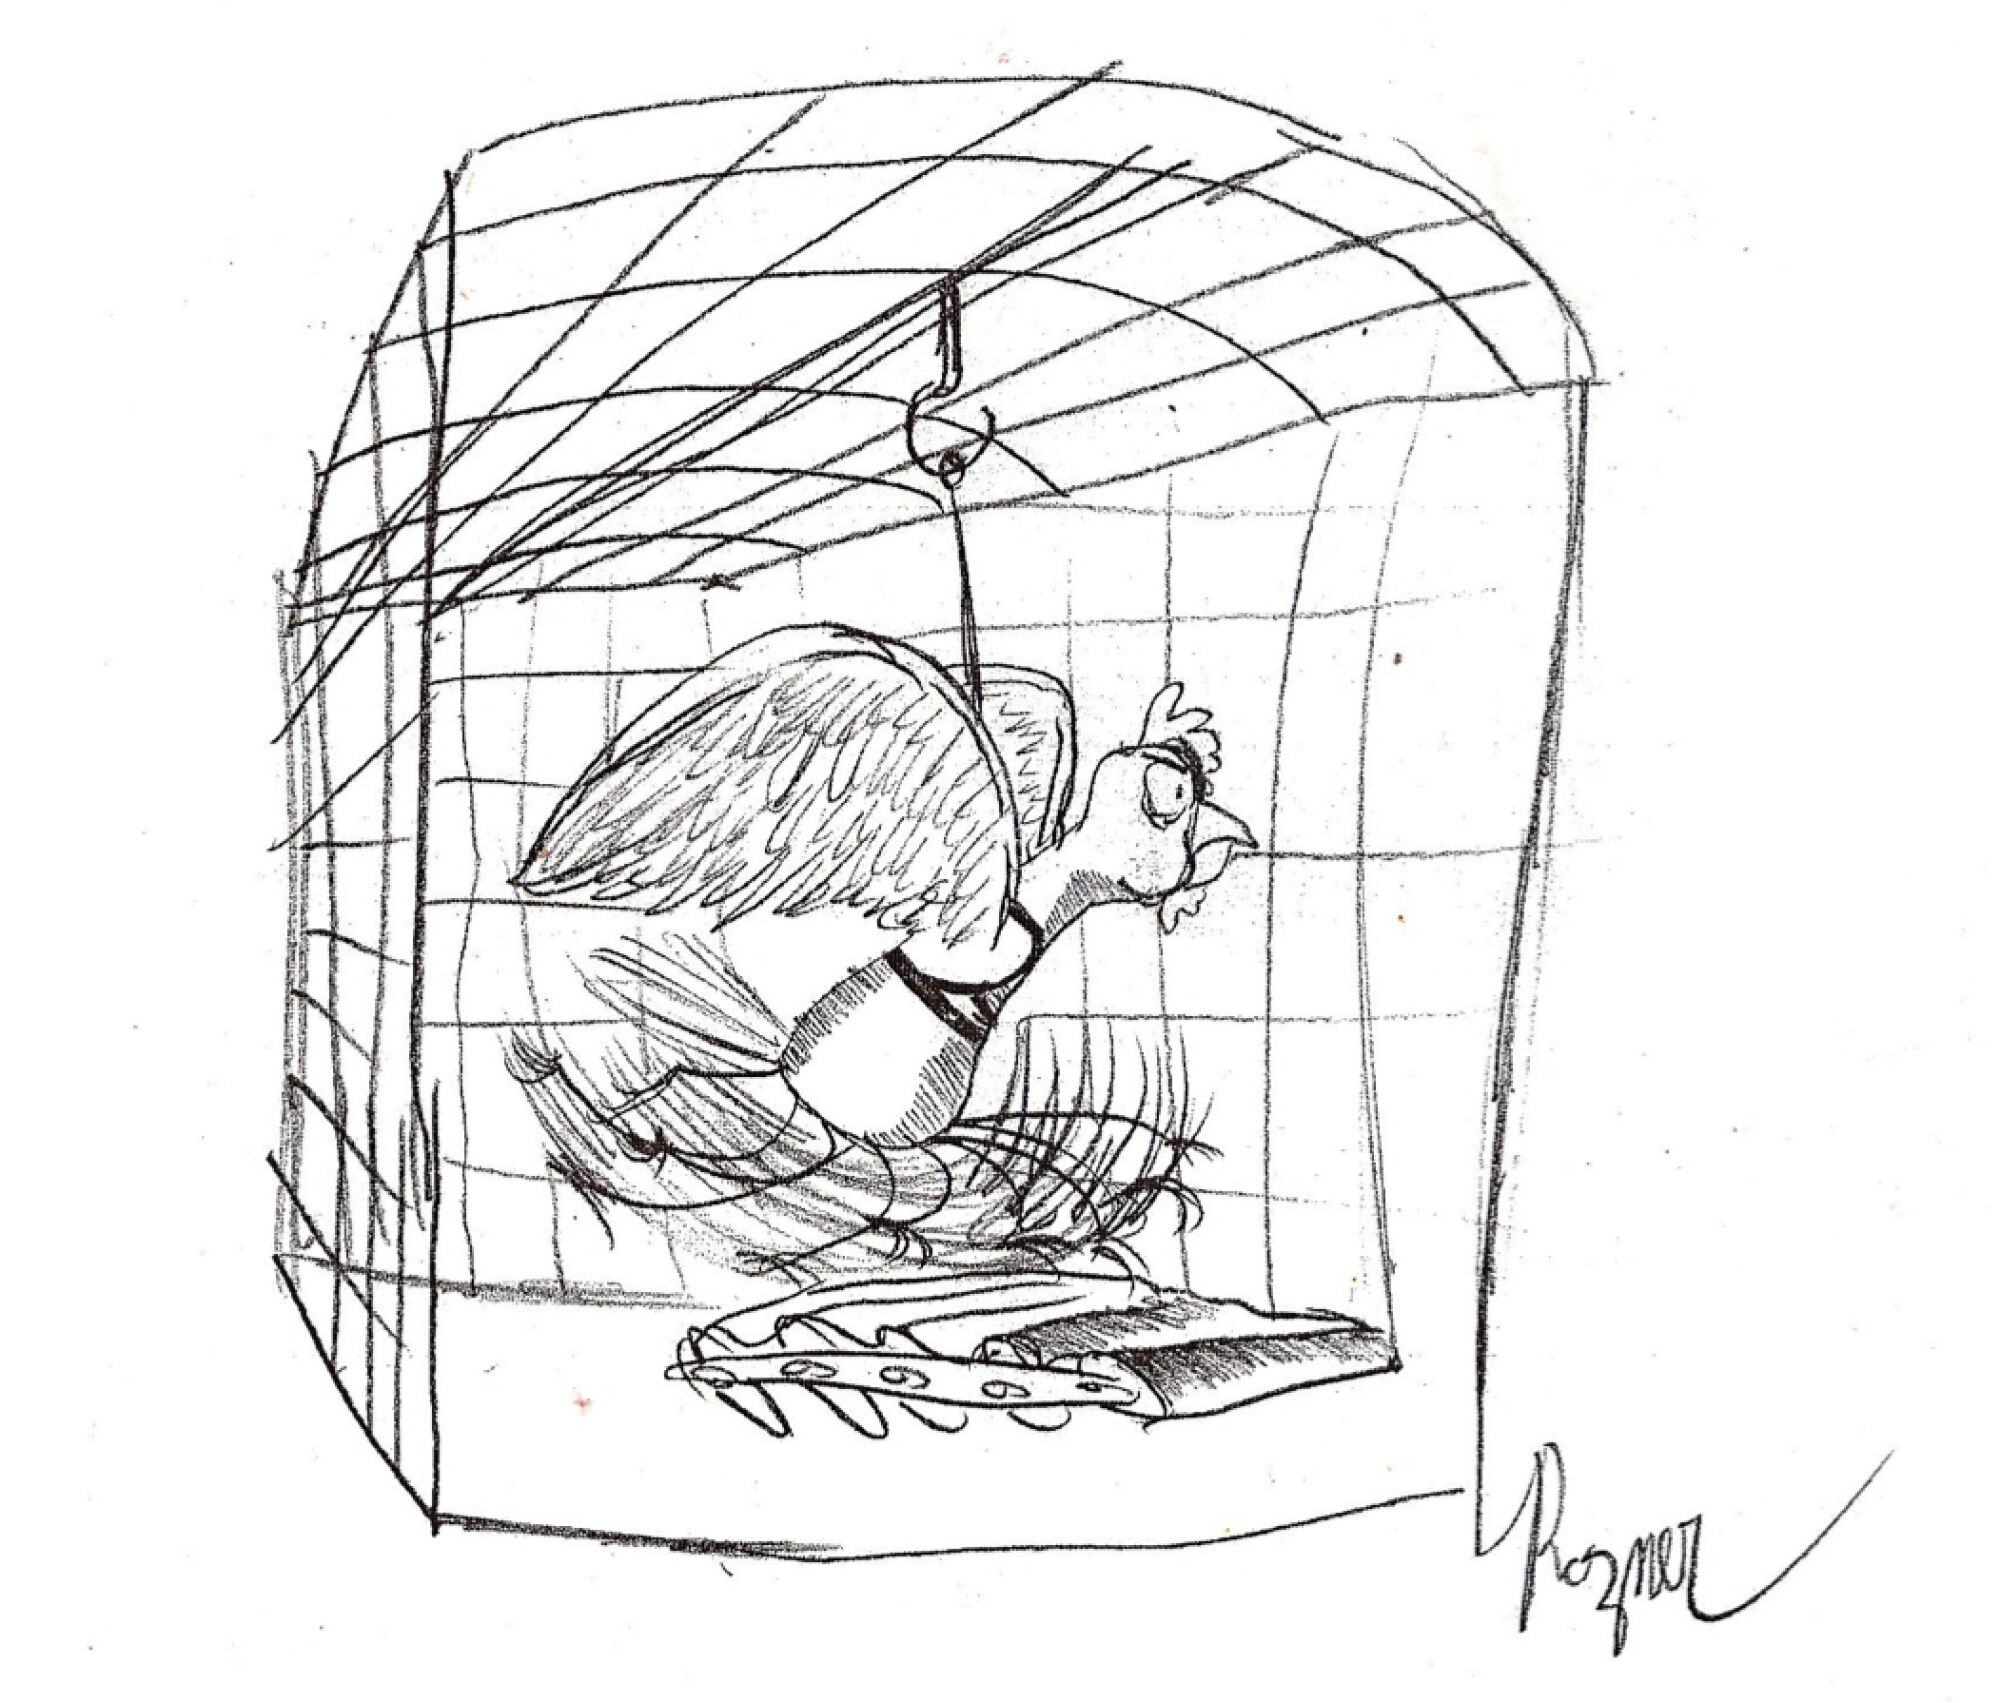 A black and white drawing of a bird sprinting on treadmill rollers in a cage